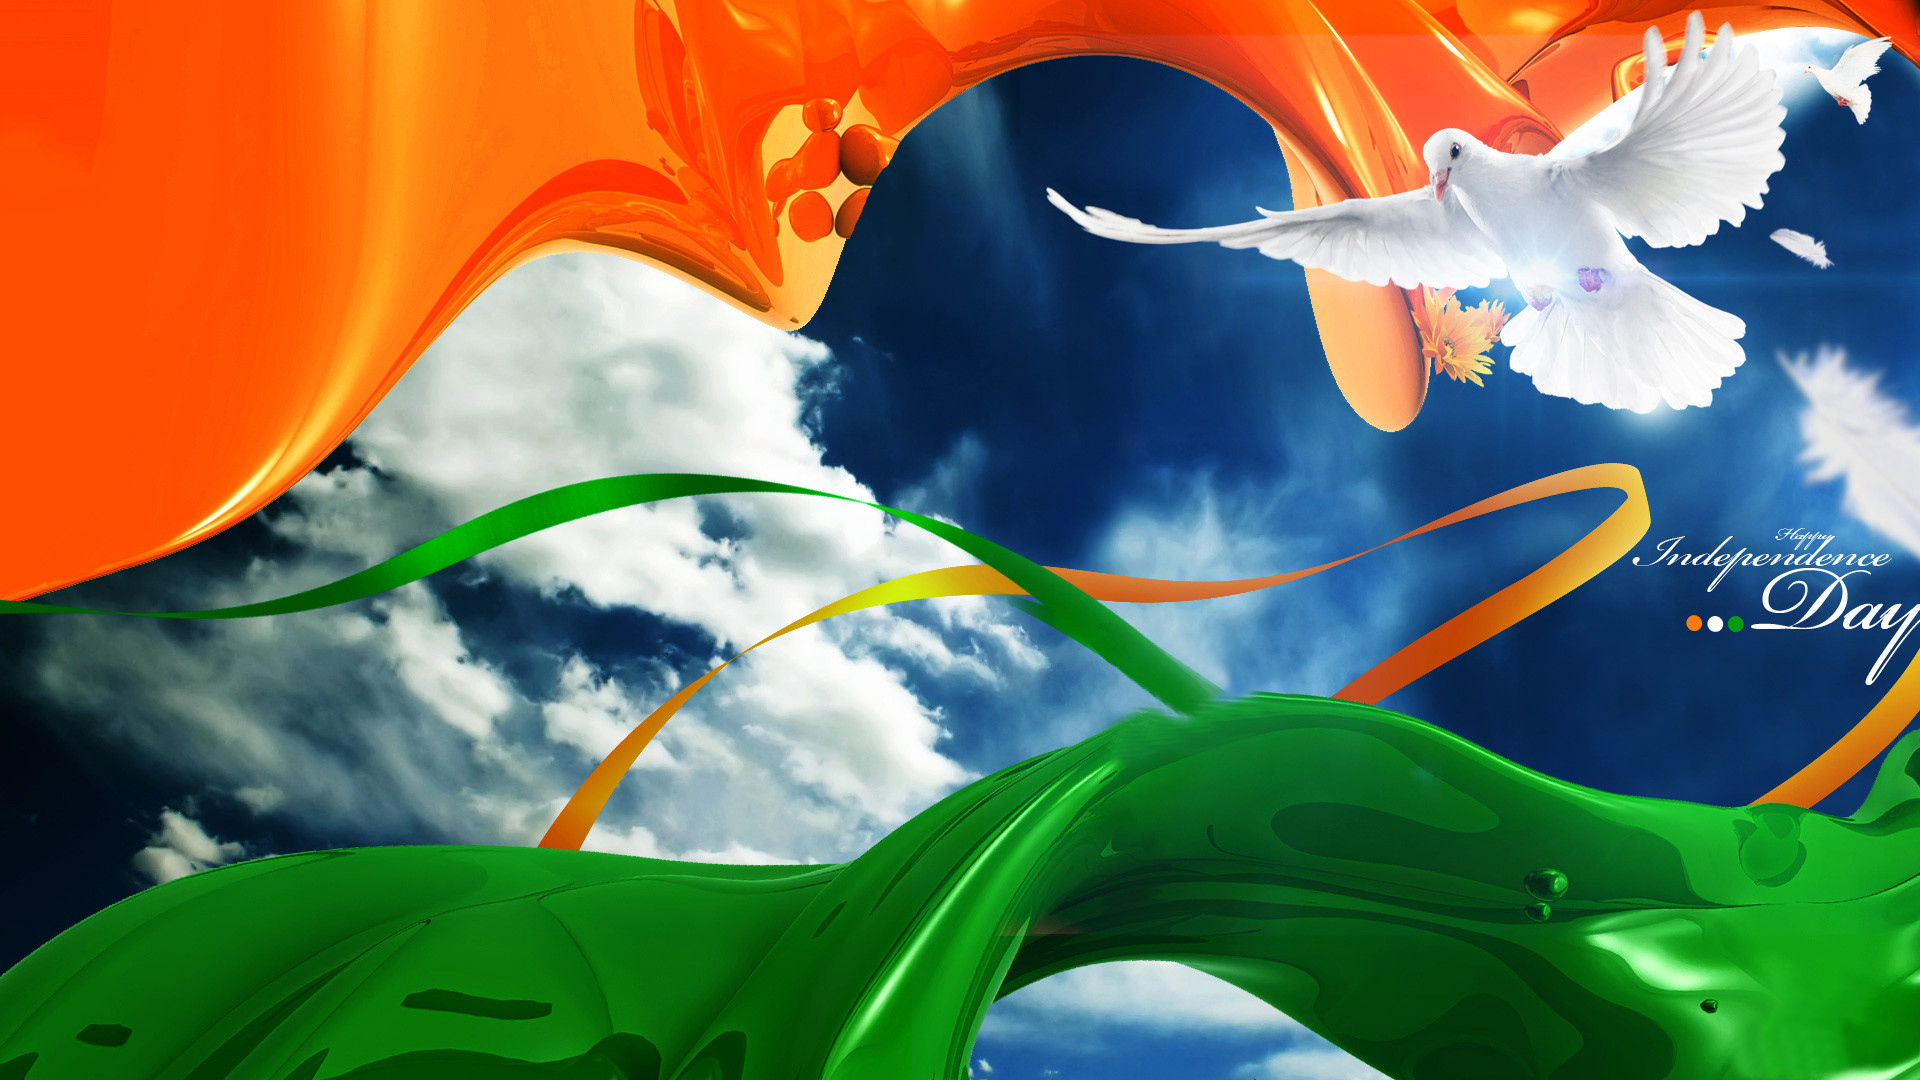 1920x1080 ... Indian Design Wallpaper On () Indian Latest Best Design Flag  For Republic Day HD ...